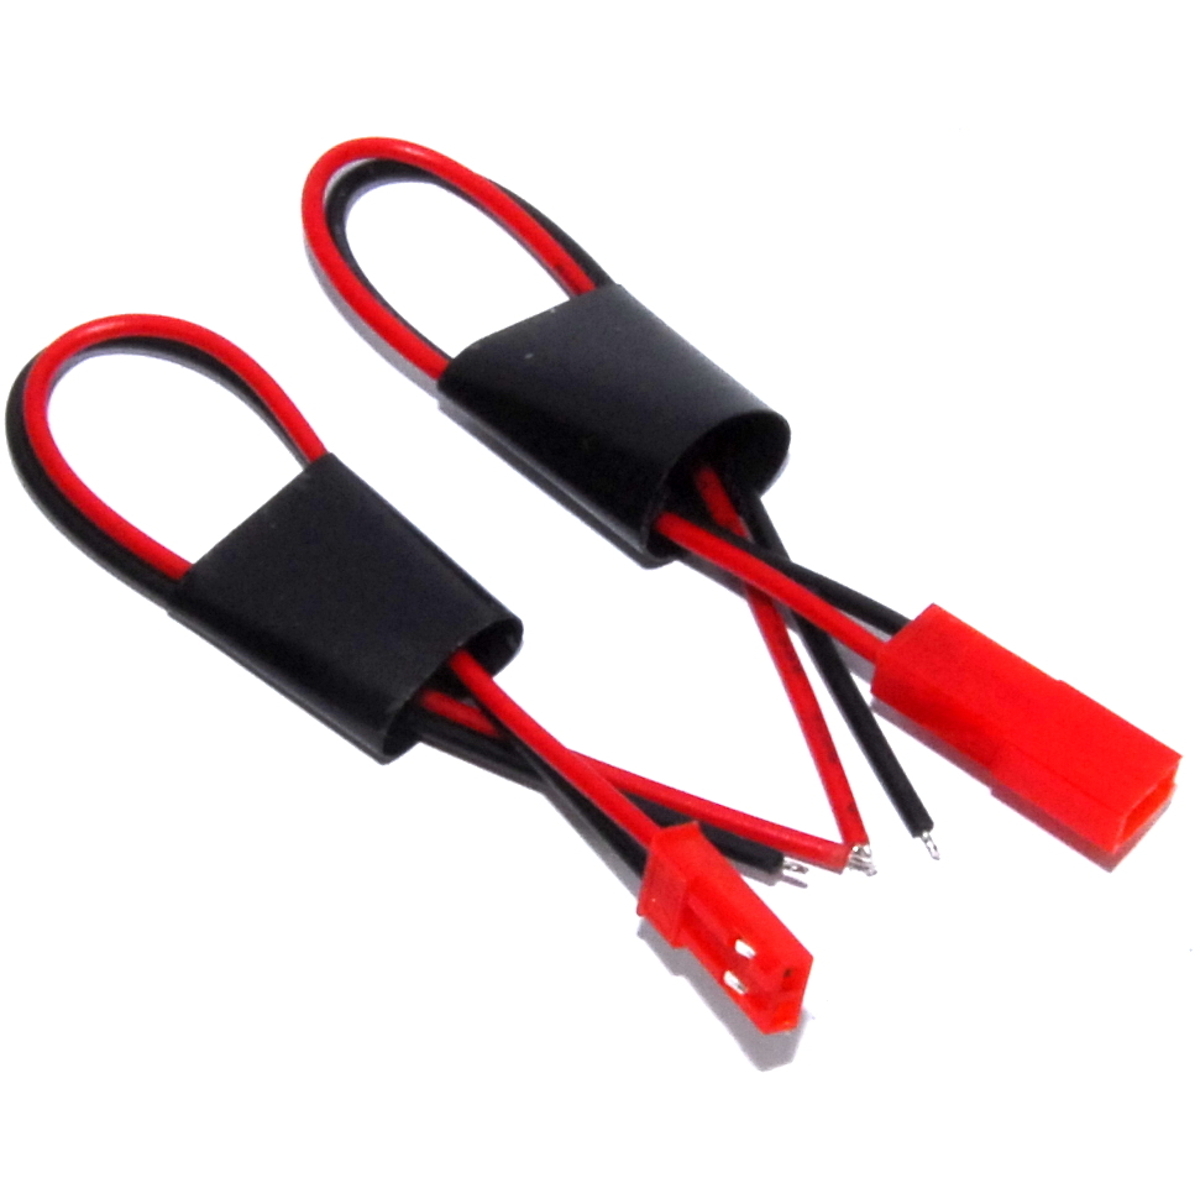 2pin-jst-rcy-matched-connector-pair-10cm-leads-lipo-male-female-flux